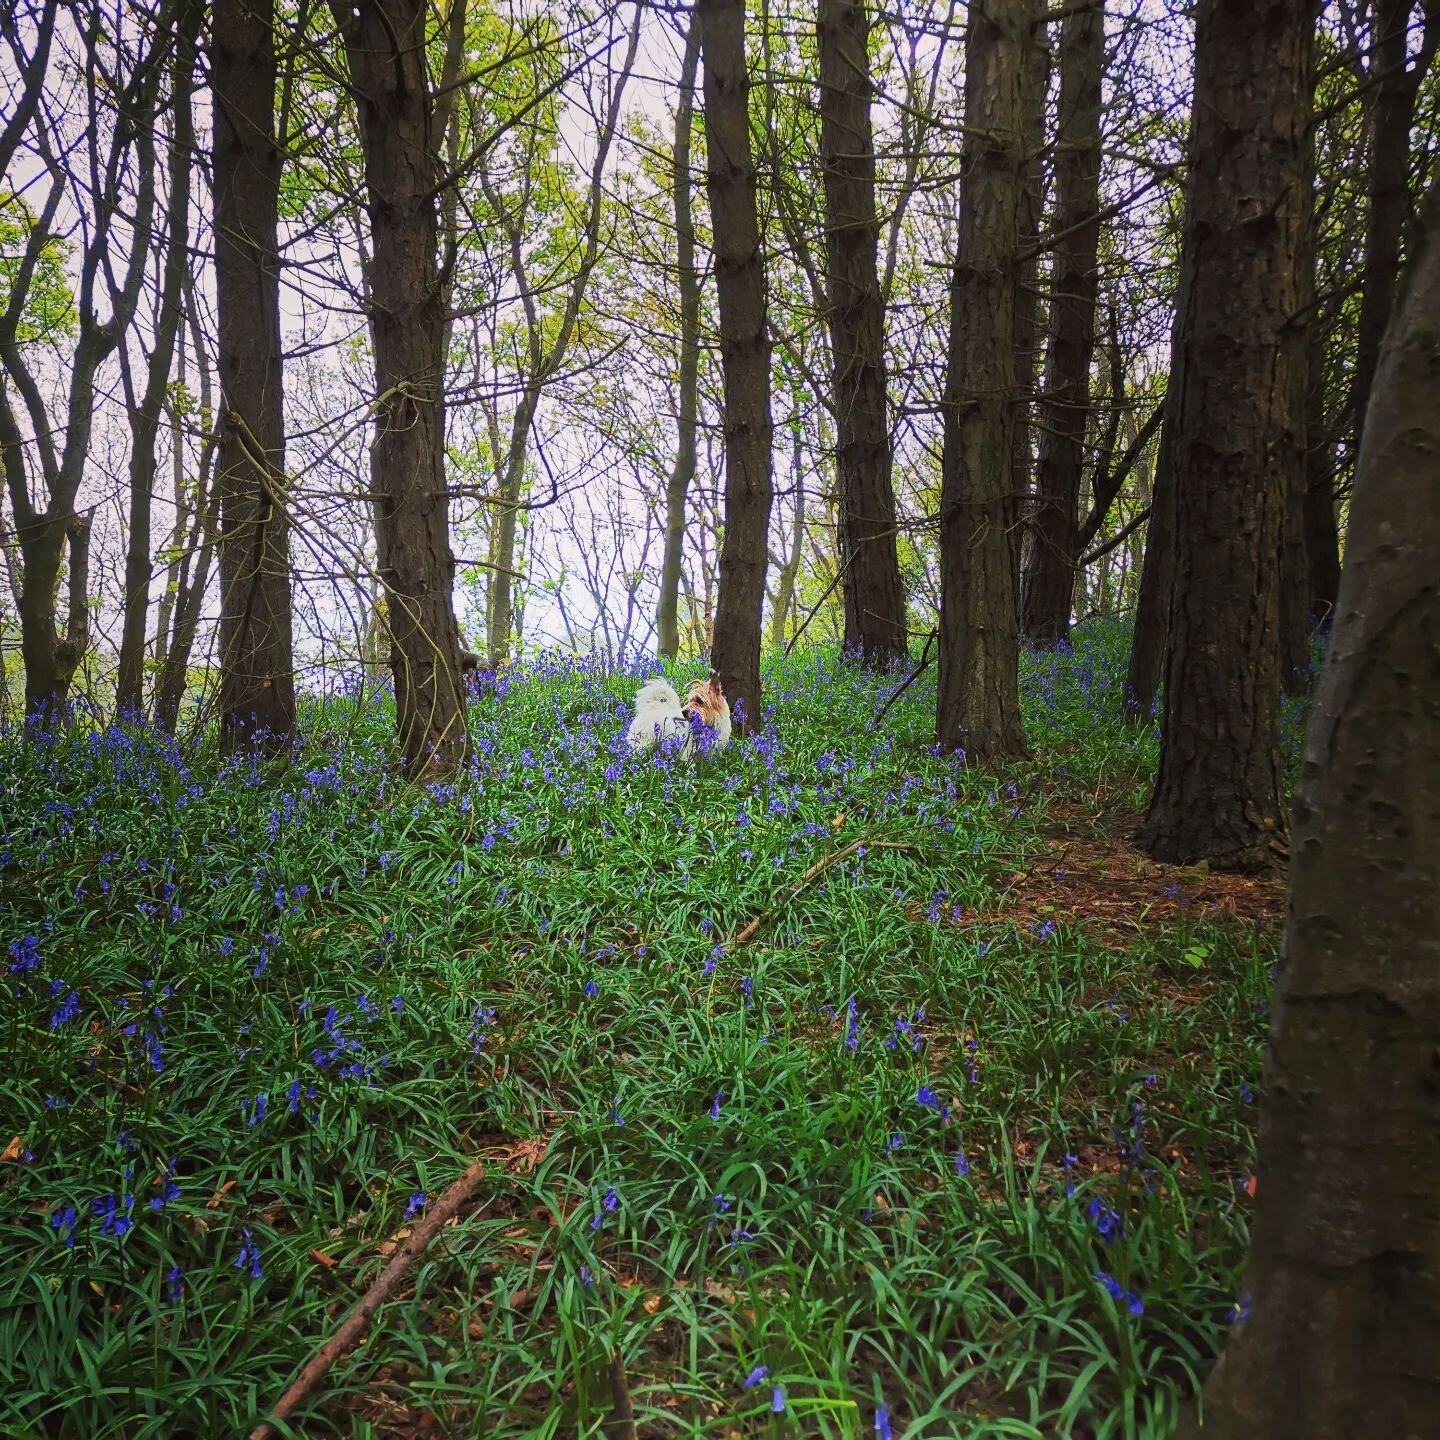 Lovely walk amongst the bluebells with the Bobster. Nice to finally get a bit of sun and warmer weather.